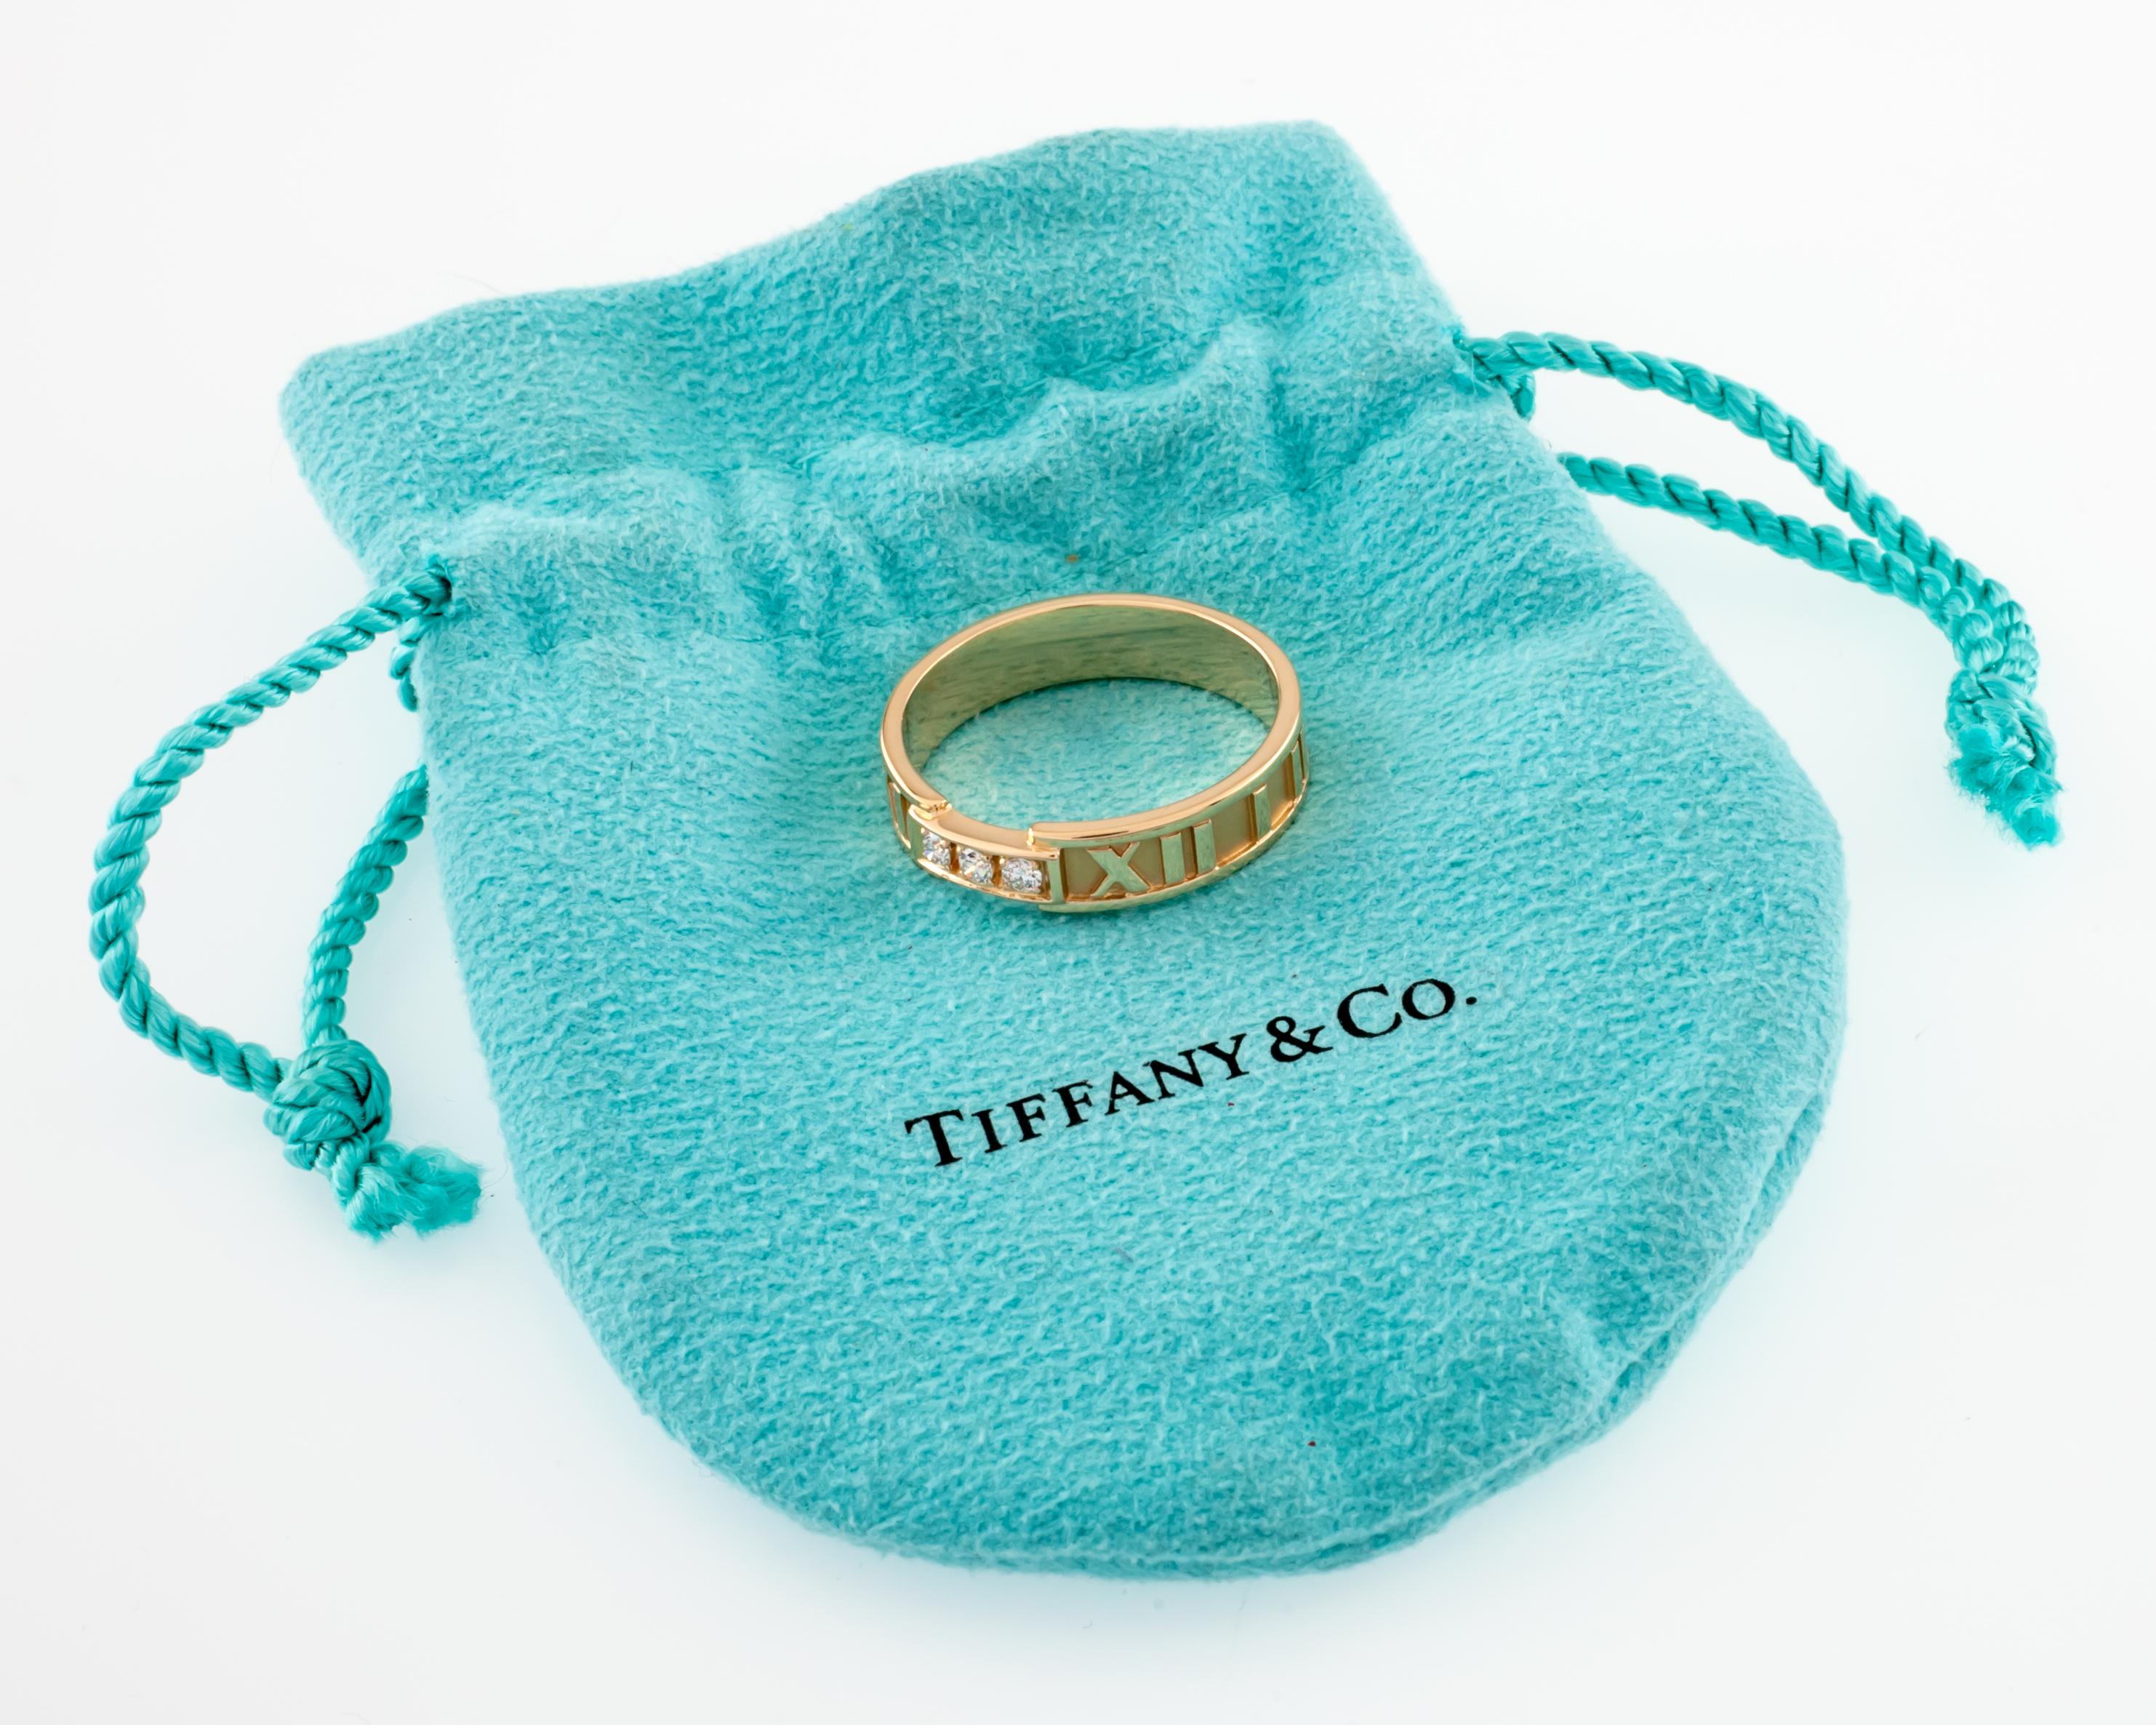 Gorgeous Band Ring by Tiffany & Co.
Features Iconic Atlas Design on Band w/ Three Pave Set Round Diamonds
Size 10.5
5 mm Wide
Total Mass = 6.0 grams
Piece is in Good Condition. Shows Few Signs of Aging or Wear. Include Original Tiffany & Co. Blue